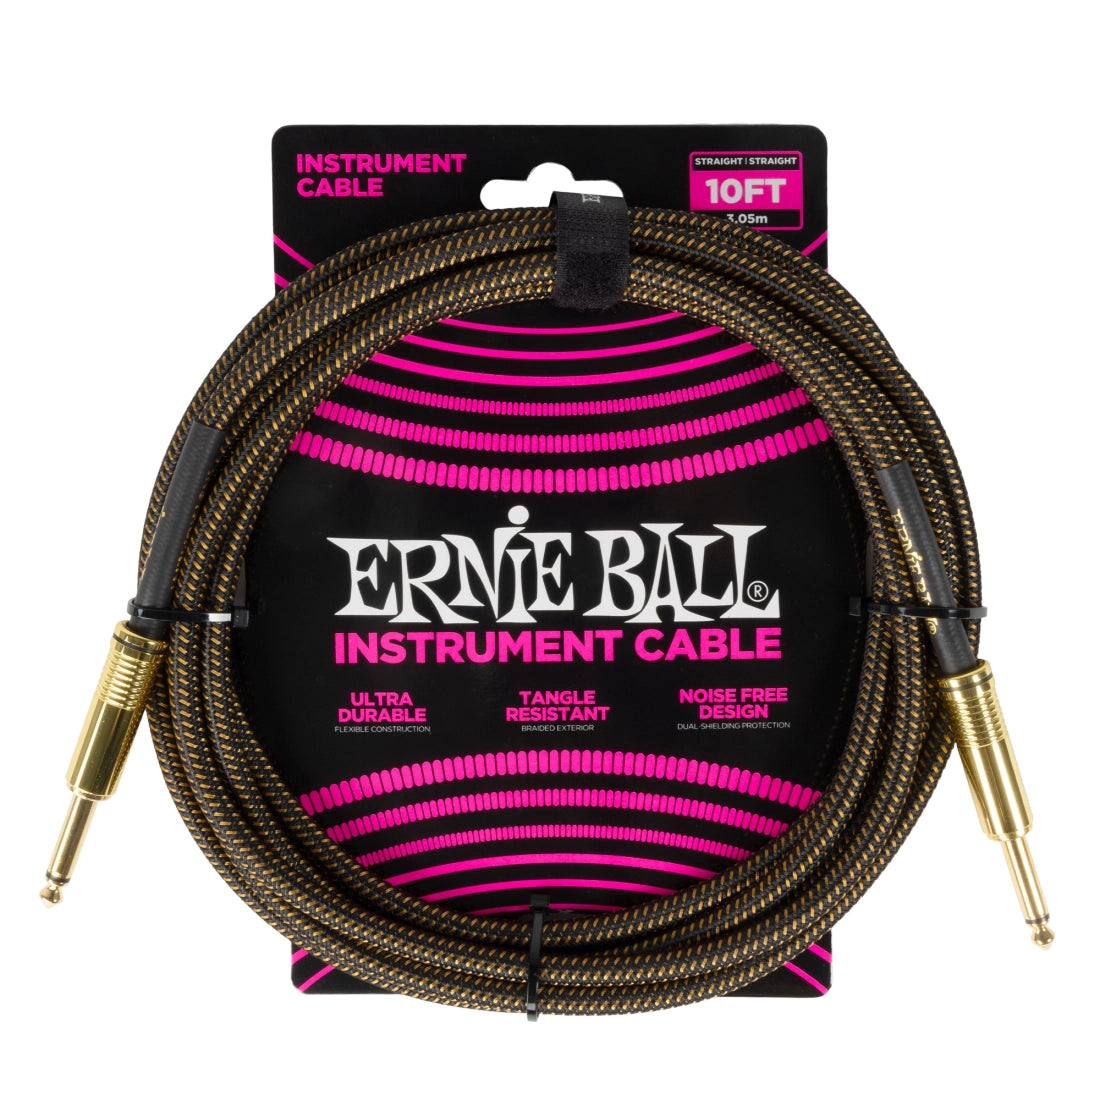 Ernie Ball 10ft Braided Instrument Cable - Pay Dirt - Joondalup Music Centre